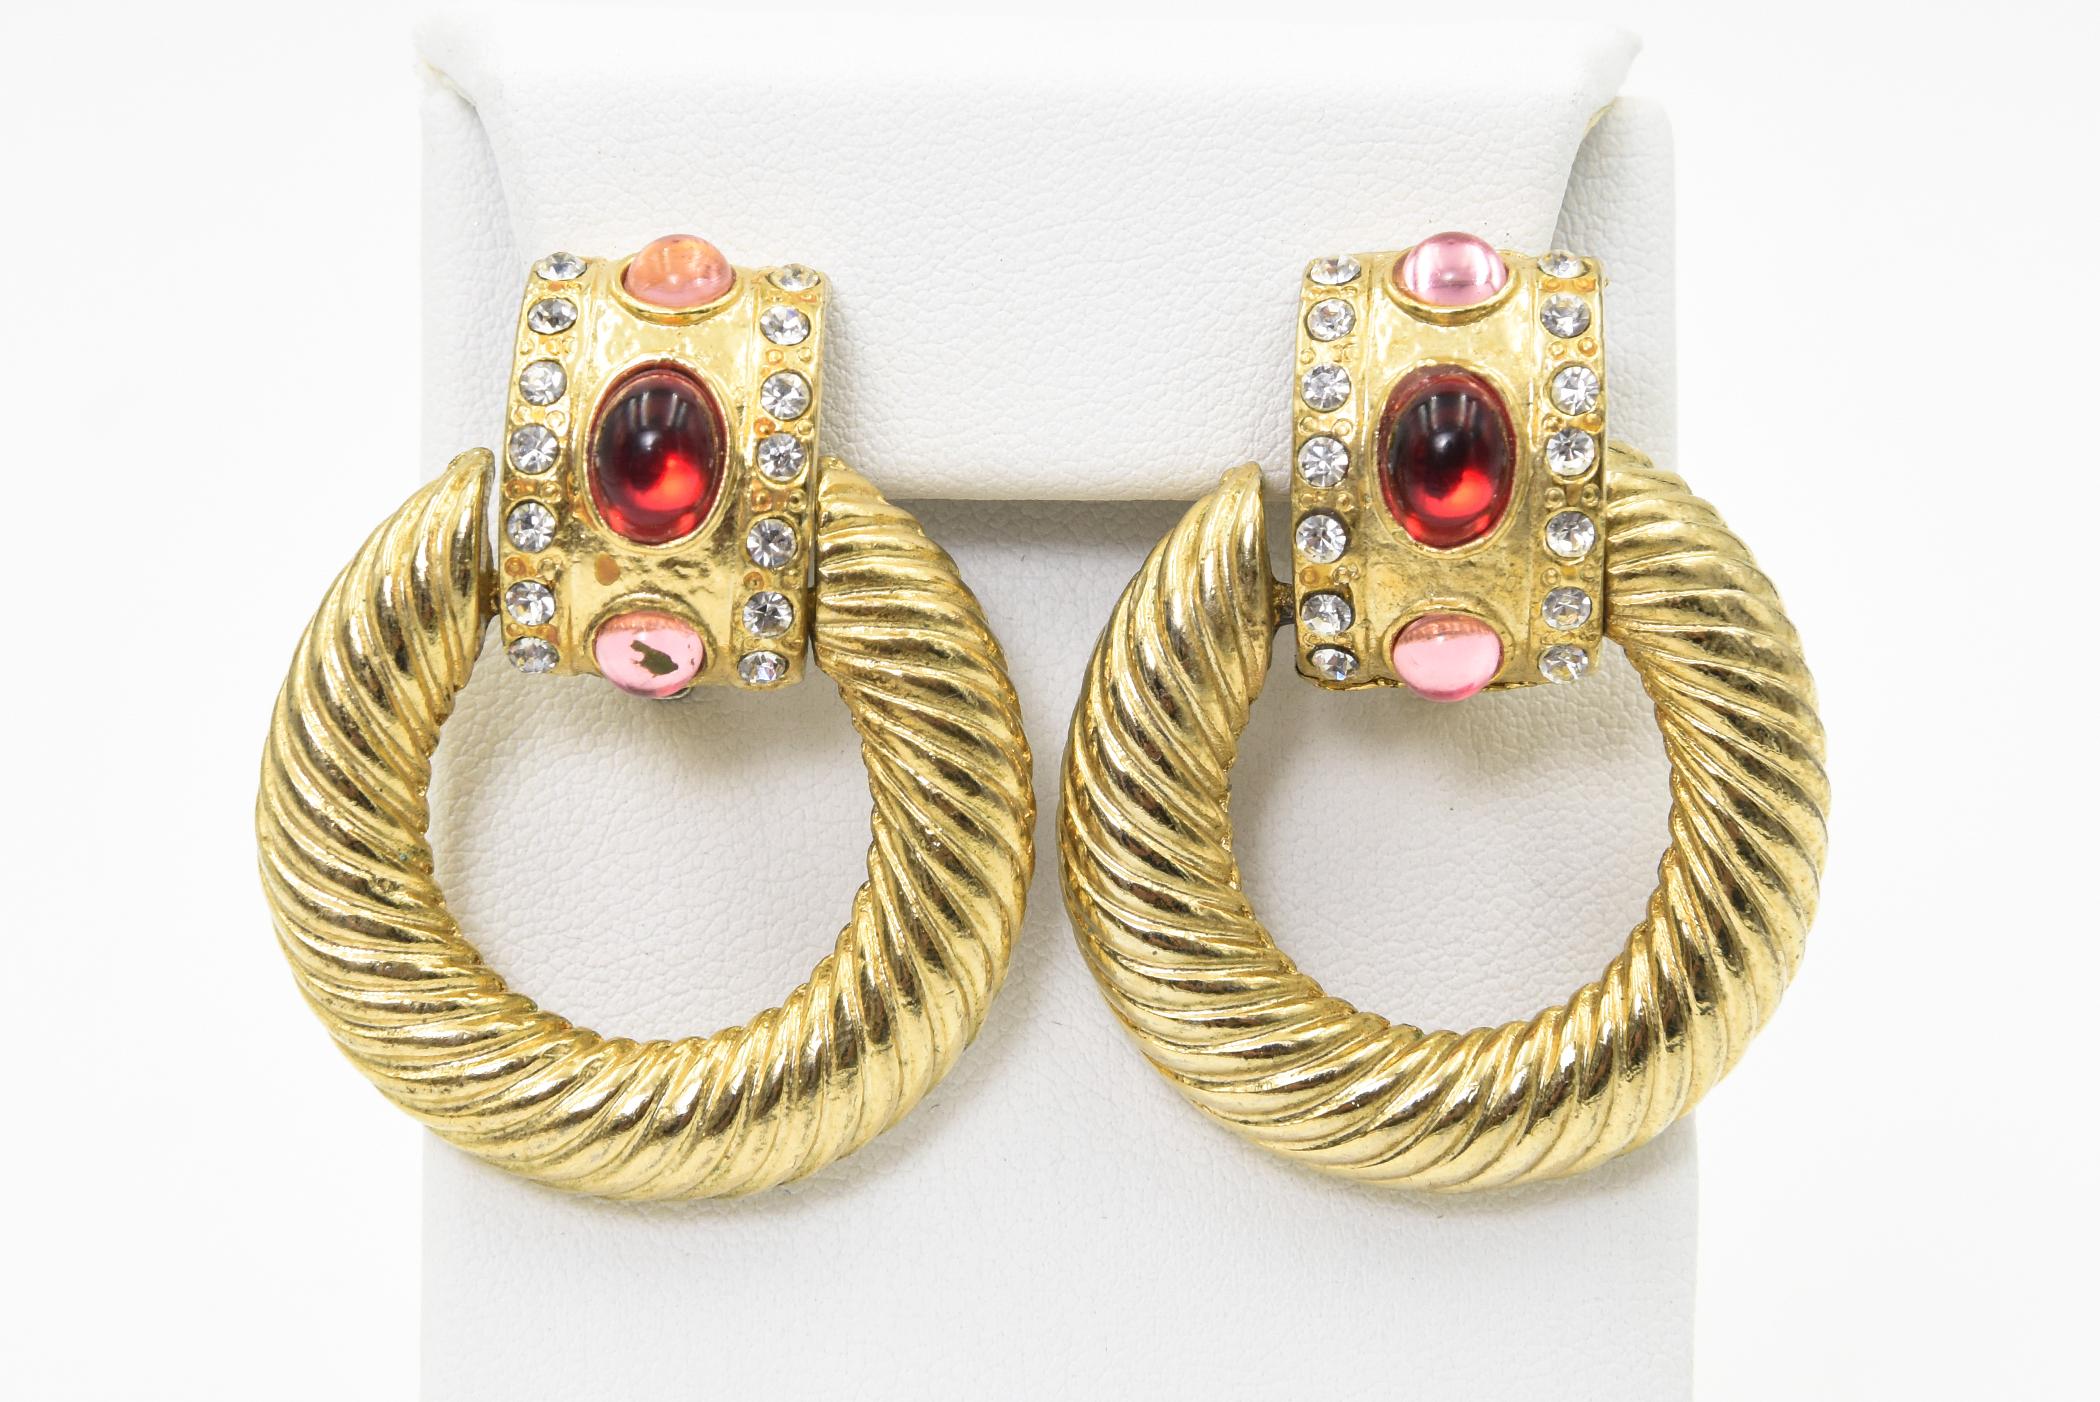 Givenchy style 1980s door knocker clip on earrings made of gold plated metal with glass stones that resemble diamonds, rubies and pink tourmaline.  The Backs have a clip-on so no pierced ears needed.